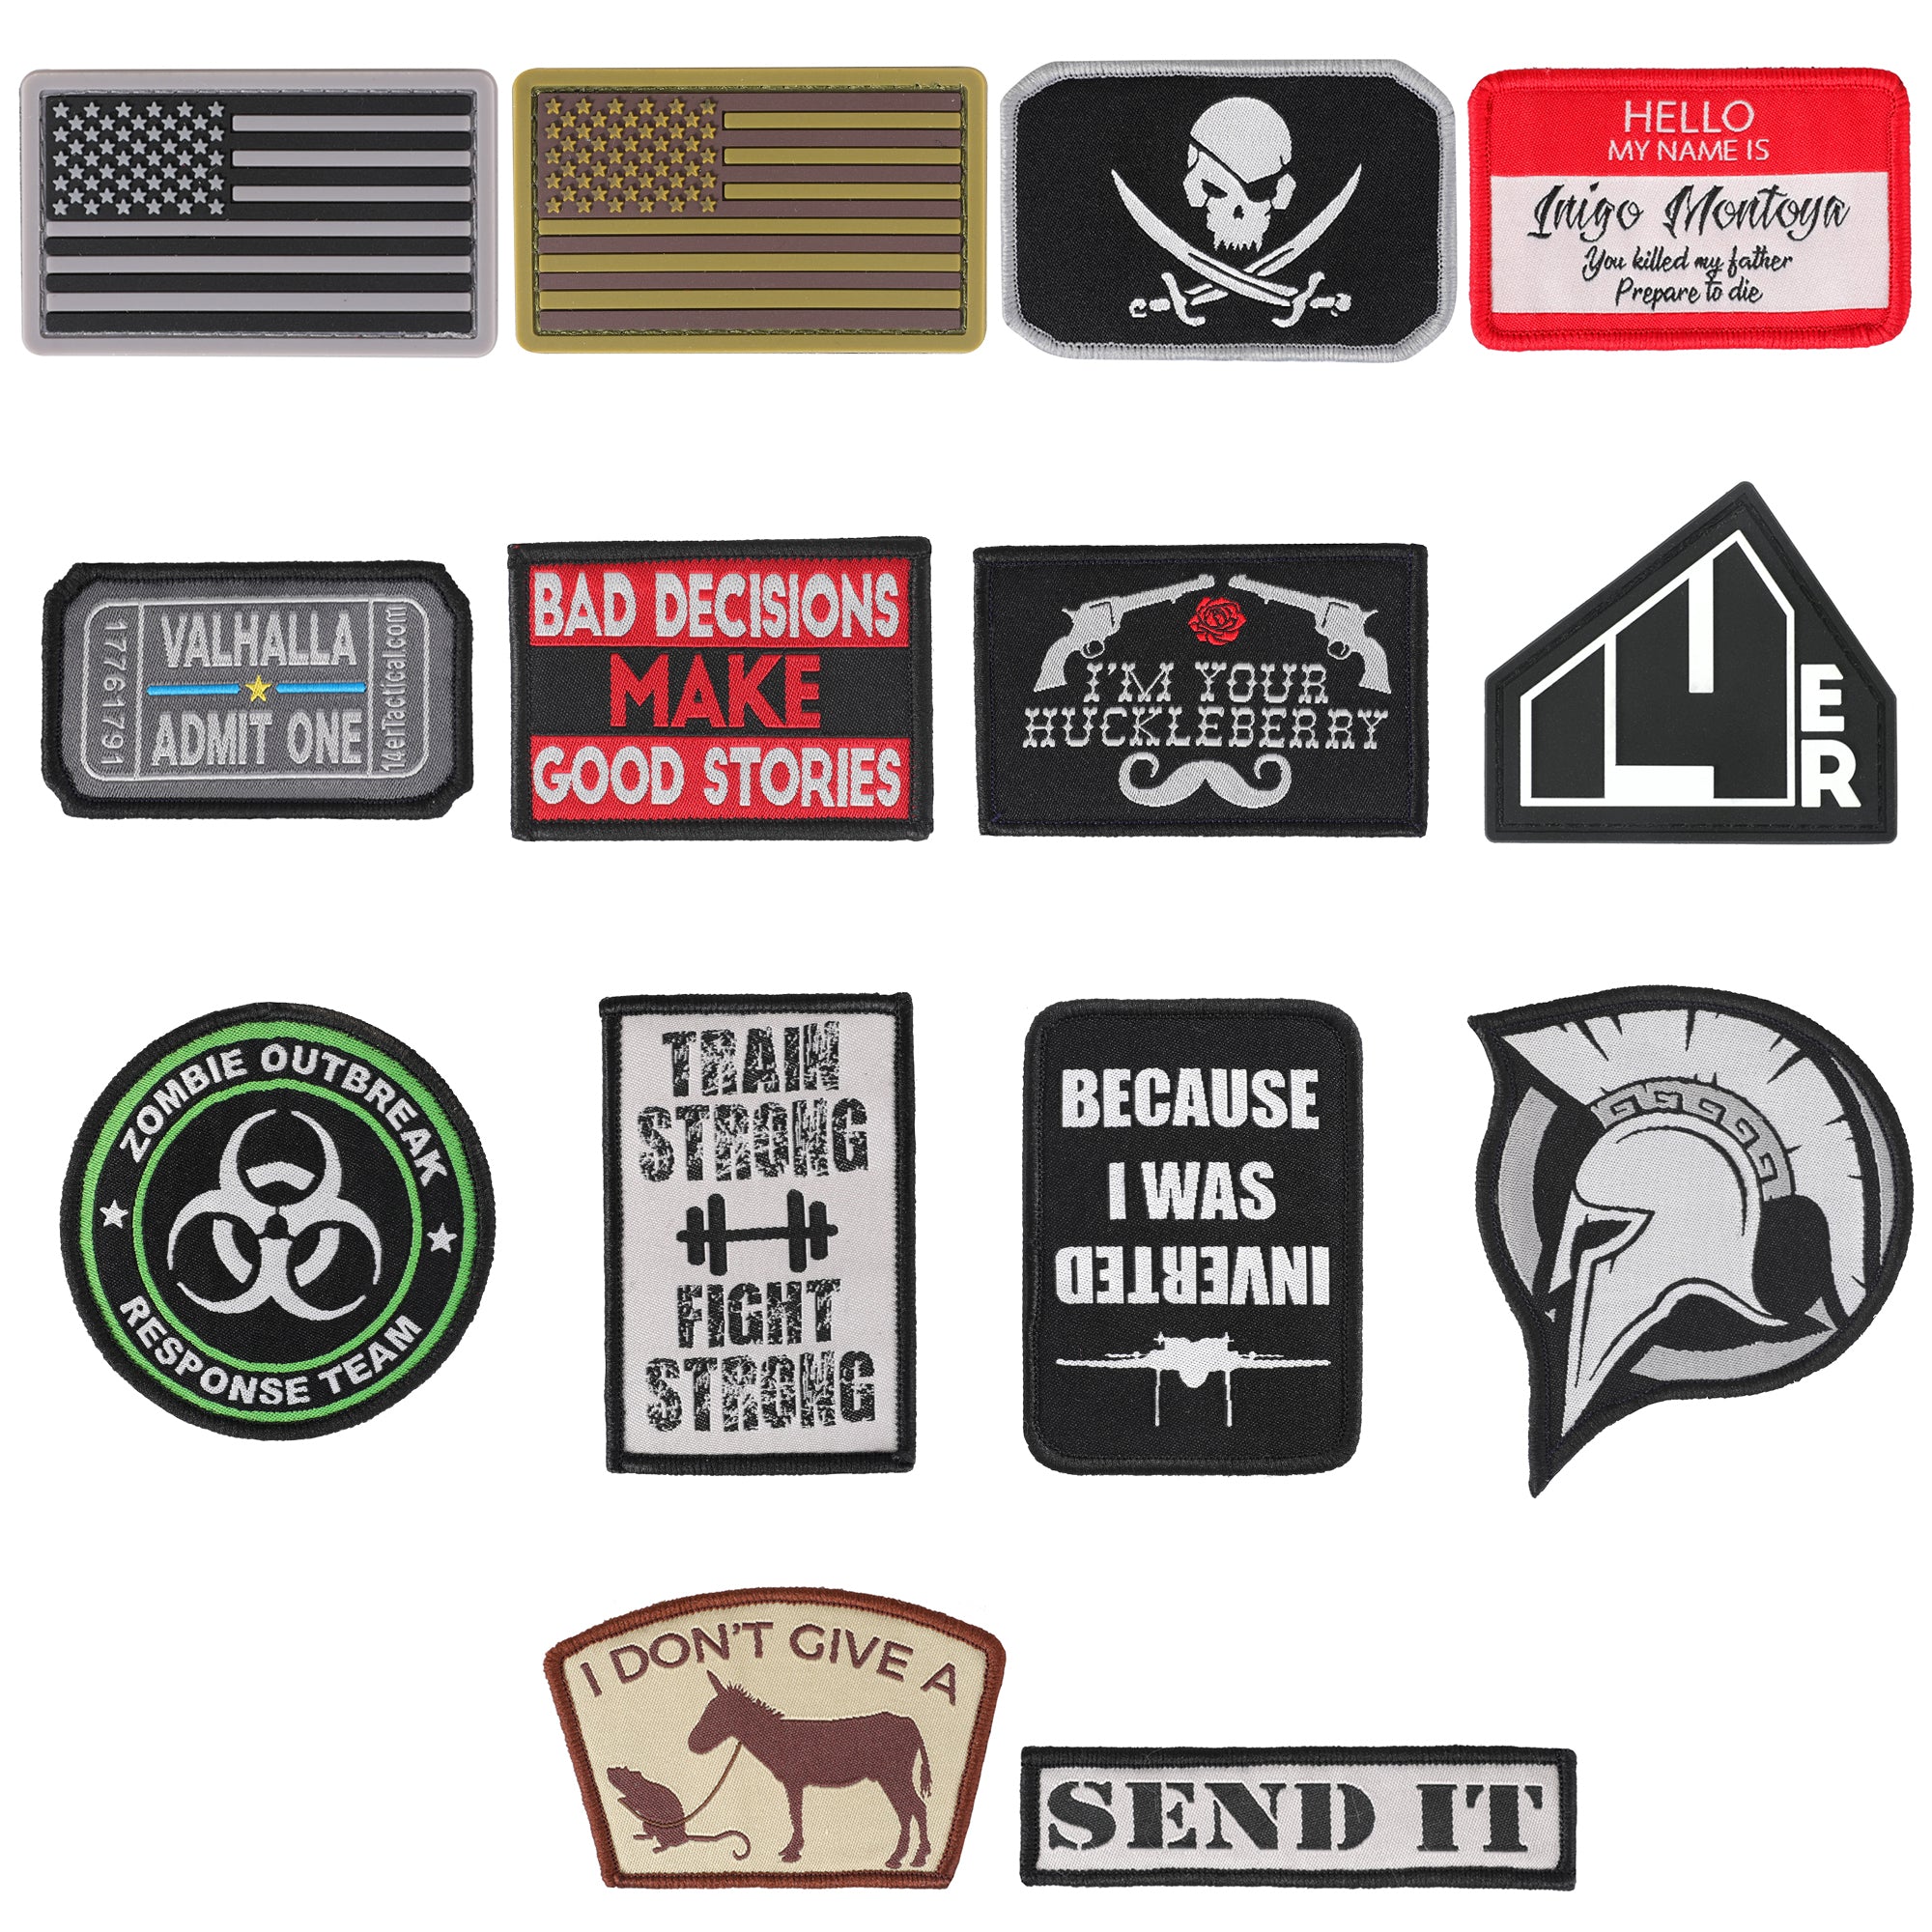 NEW PVC Patches: The Perfect Patch for Hats and More?! 